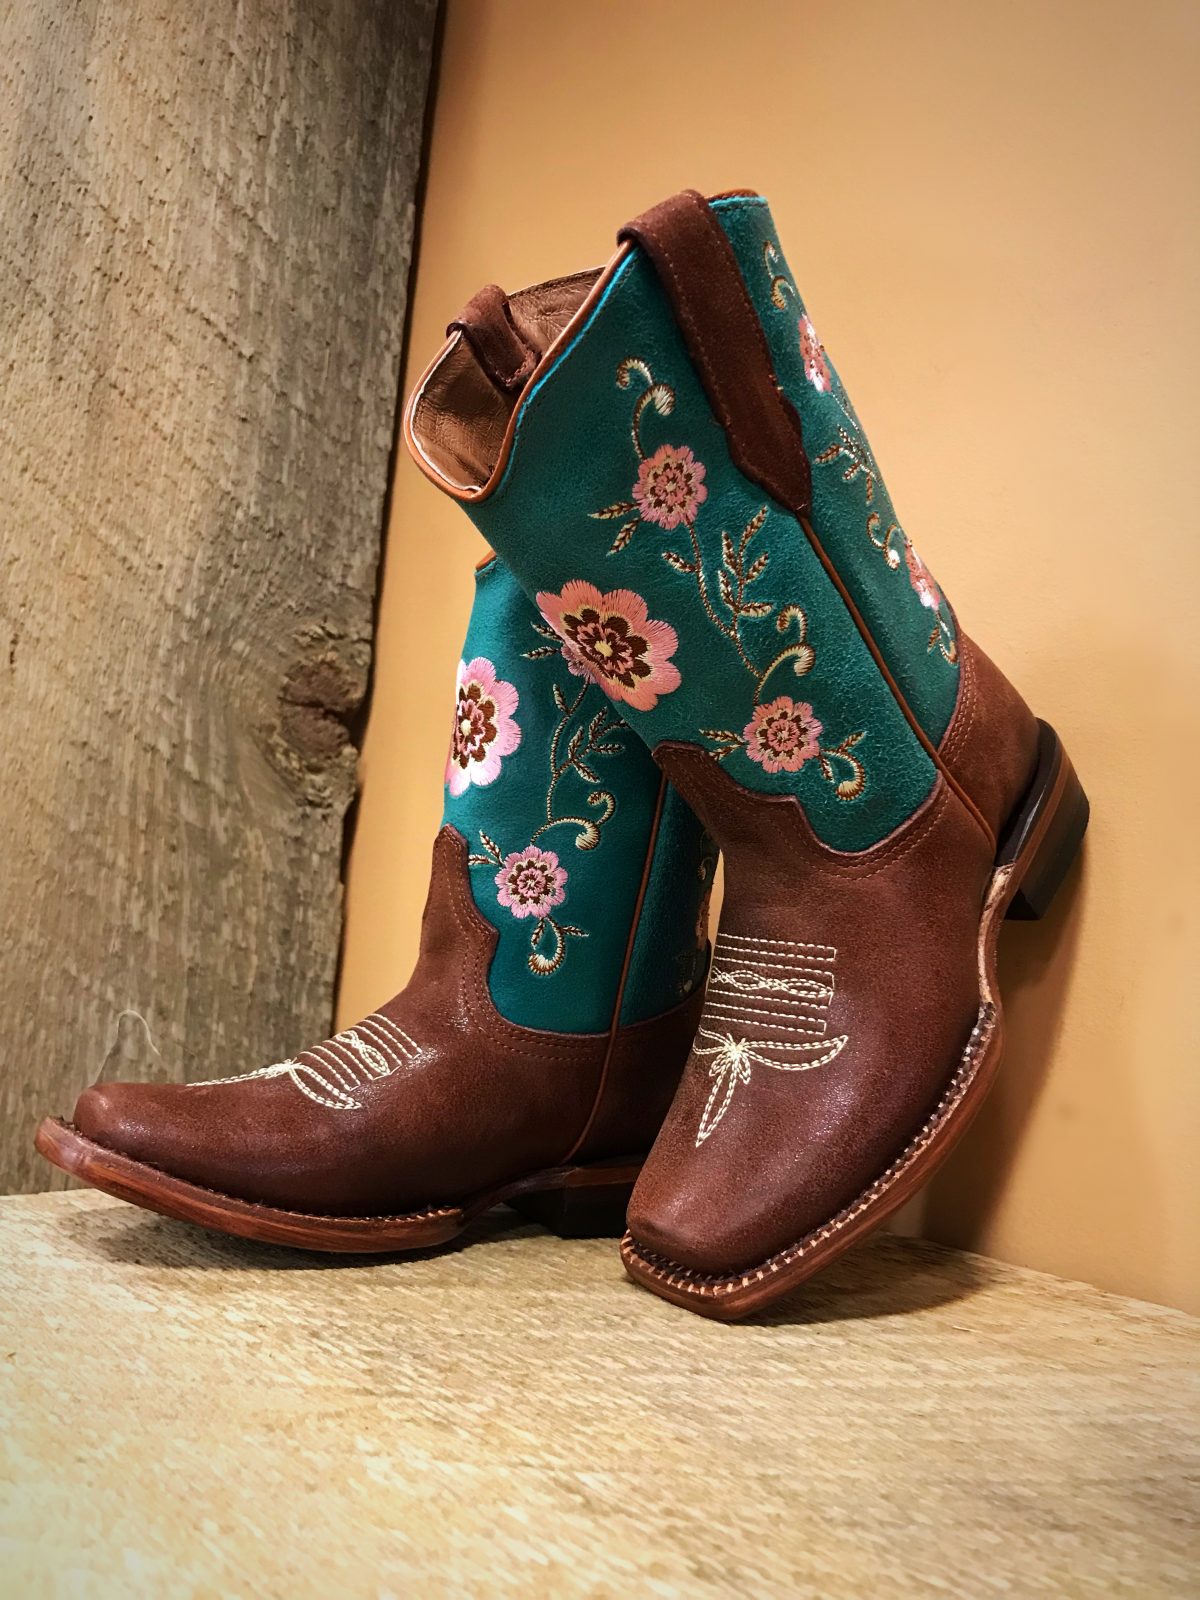 Girls Floral Embroidery Cowgirl Boots ( Shedron ) – El Potrerito